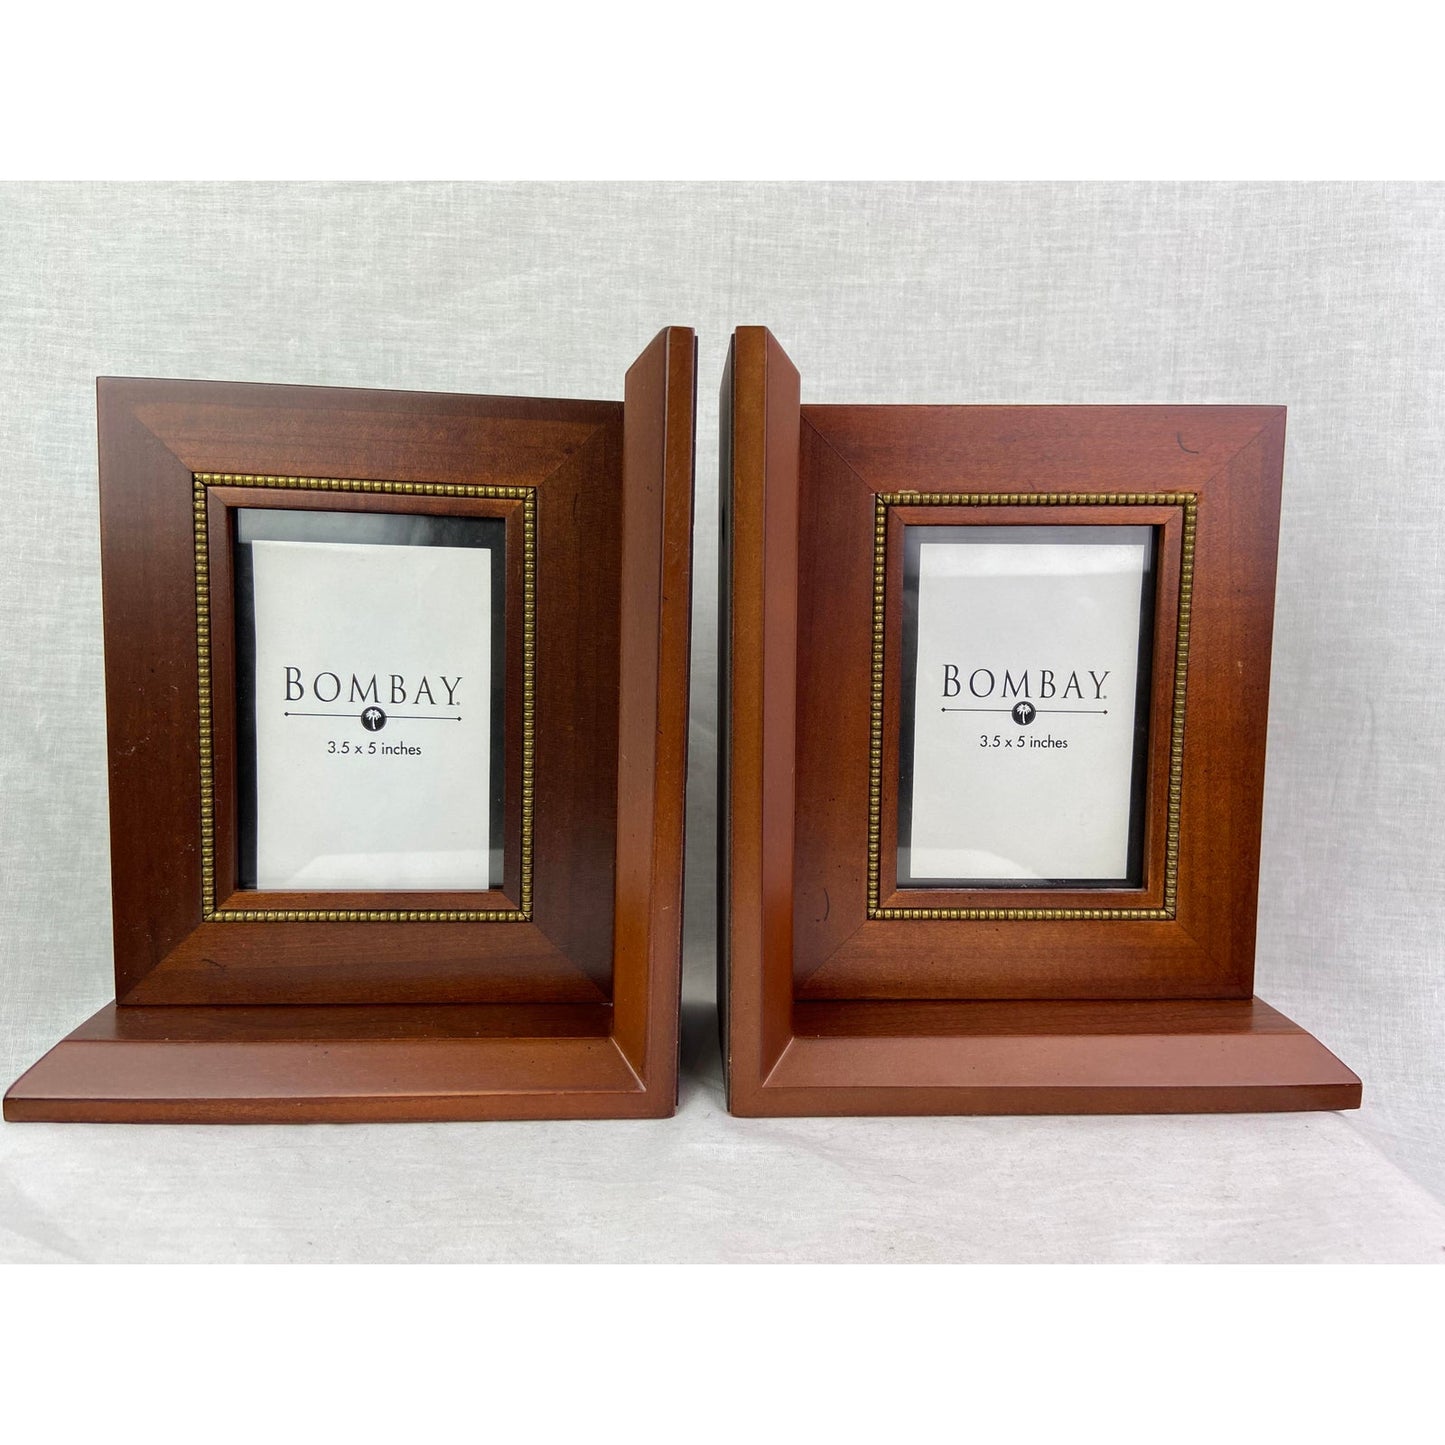 [SOLD] Vintage Bombay Company Wood Picture Frame Bookends- Pair of 2